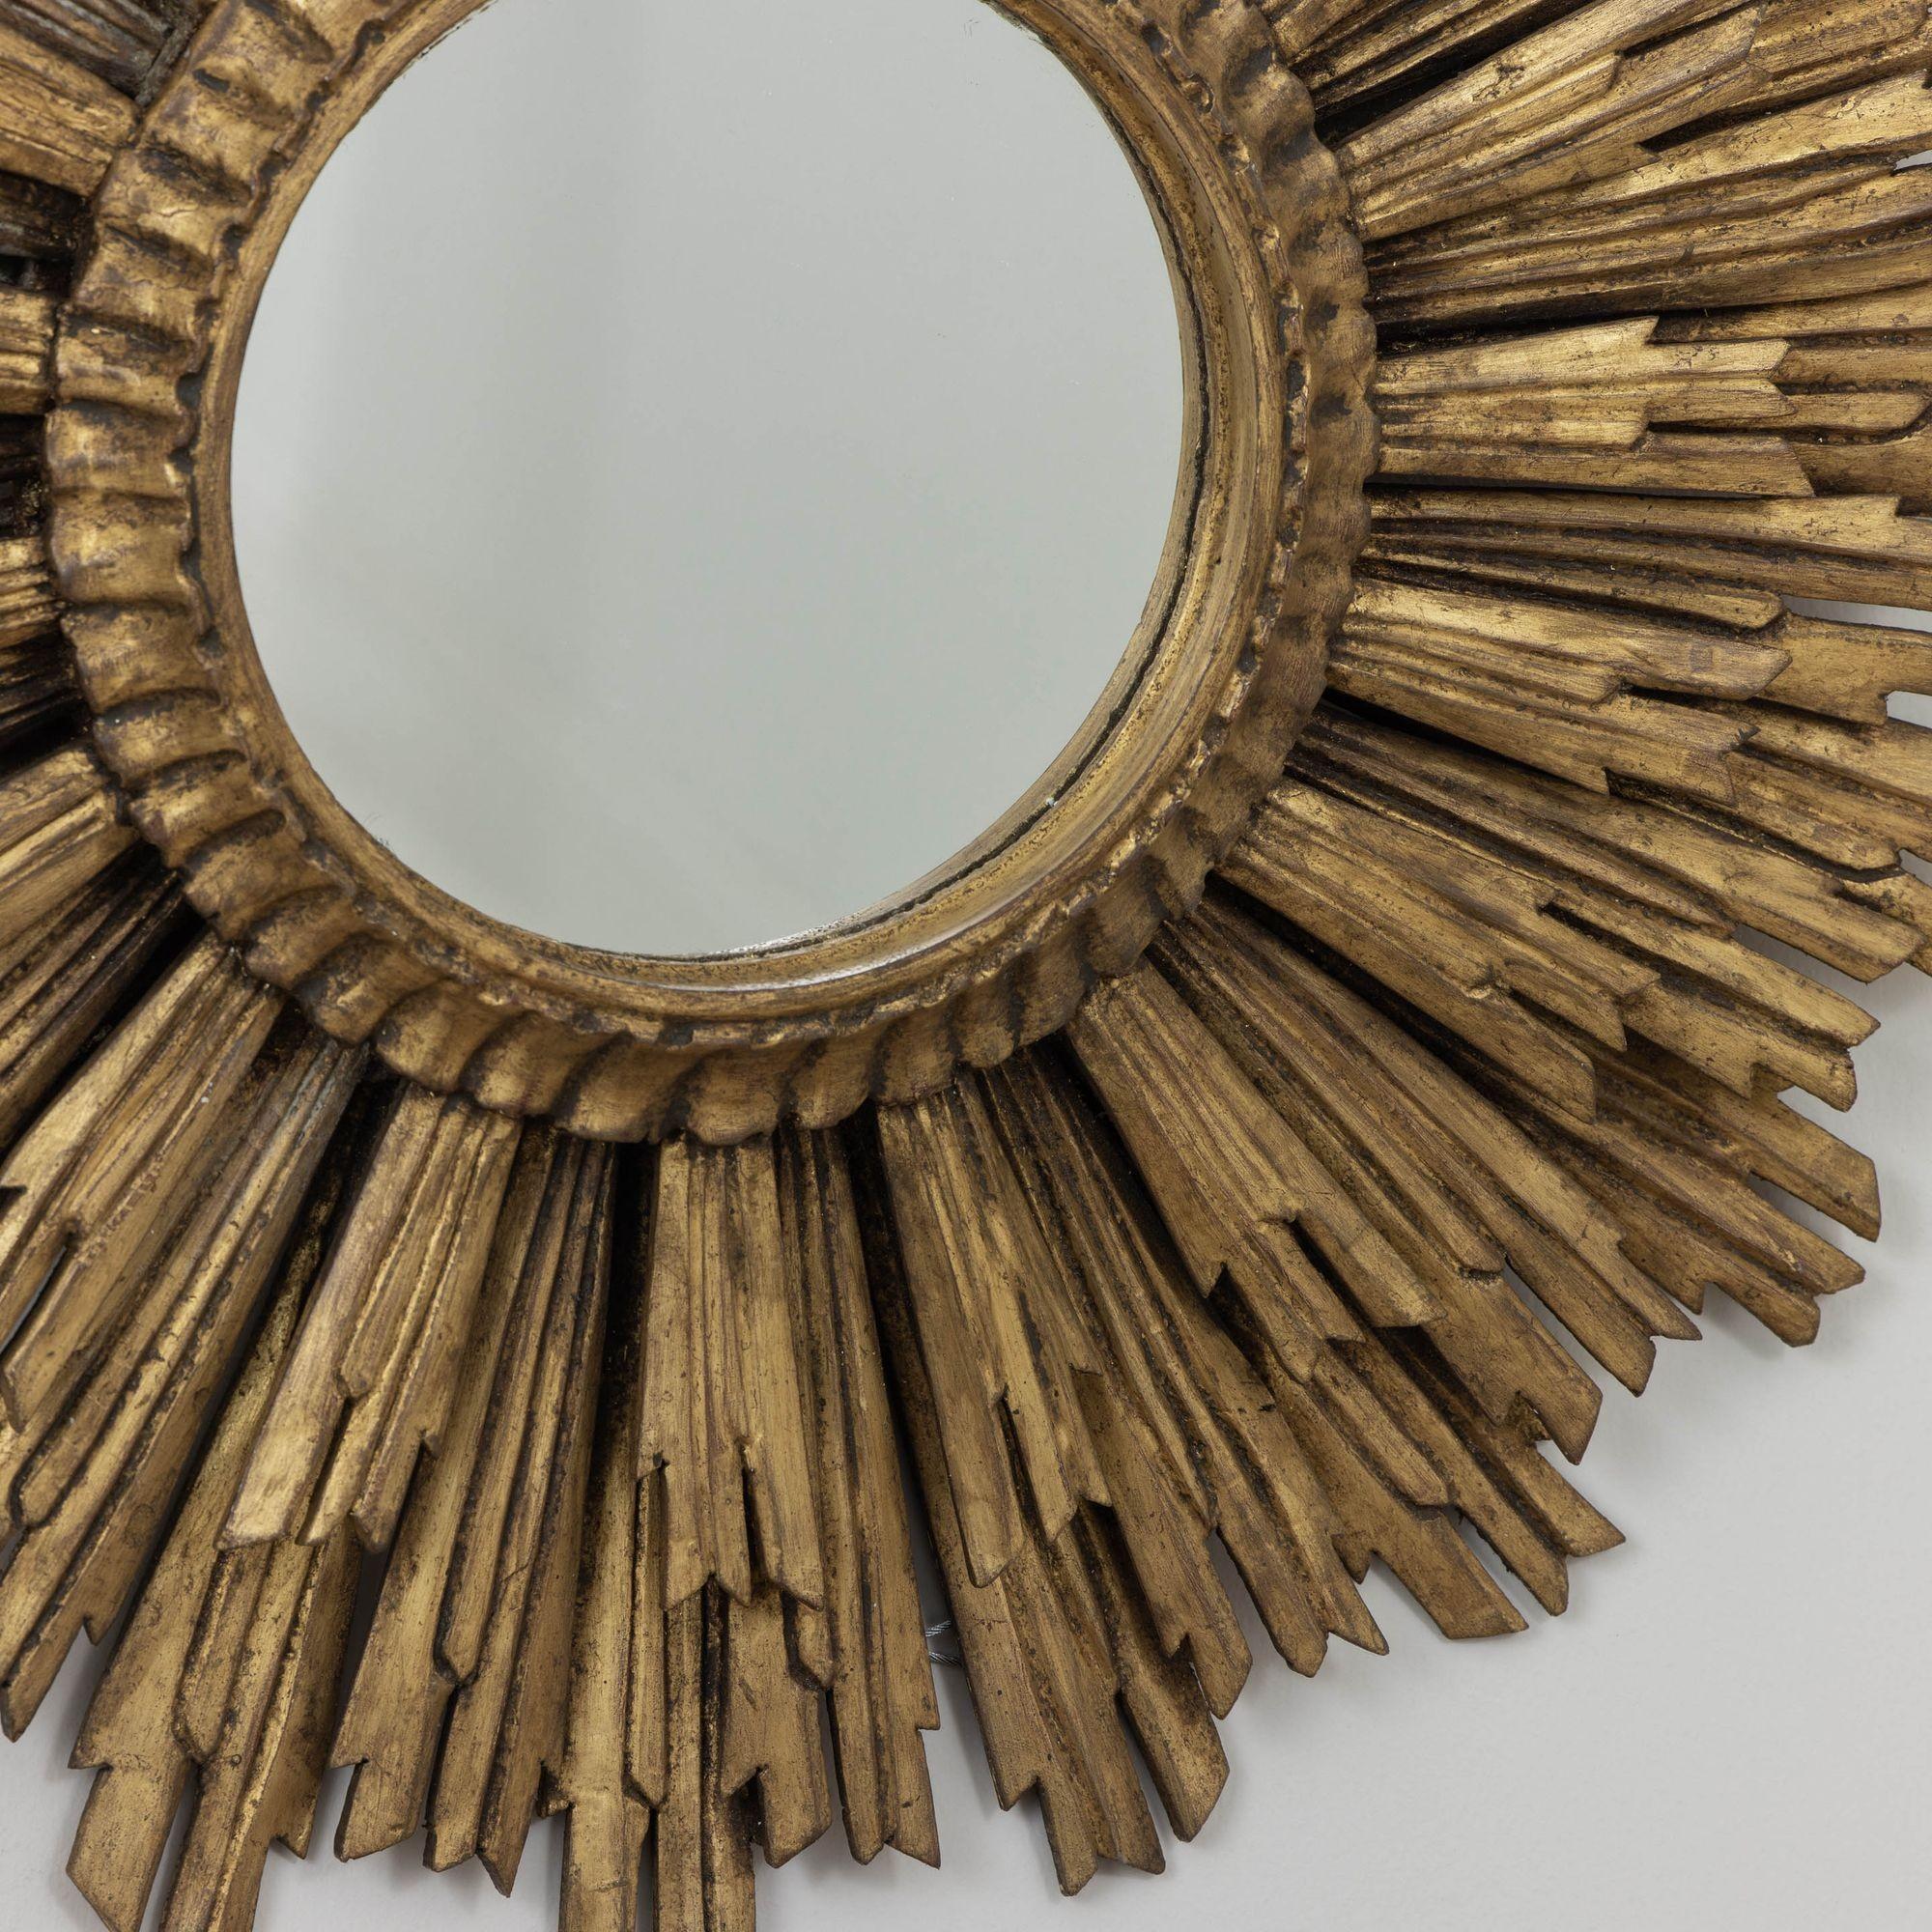 Large Early -Mid 20th c. French Art Deco Giltwood Sunburst Mirror For Sale 1